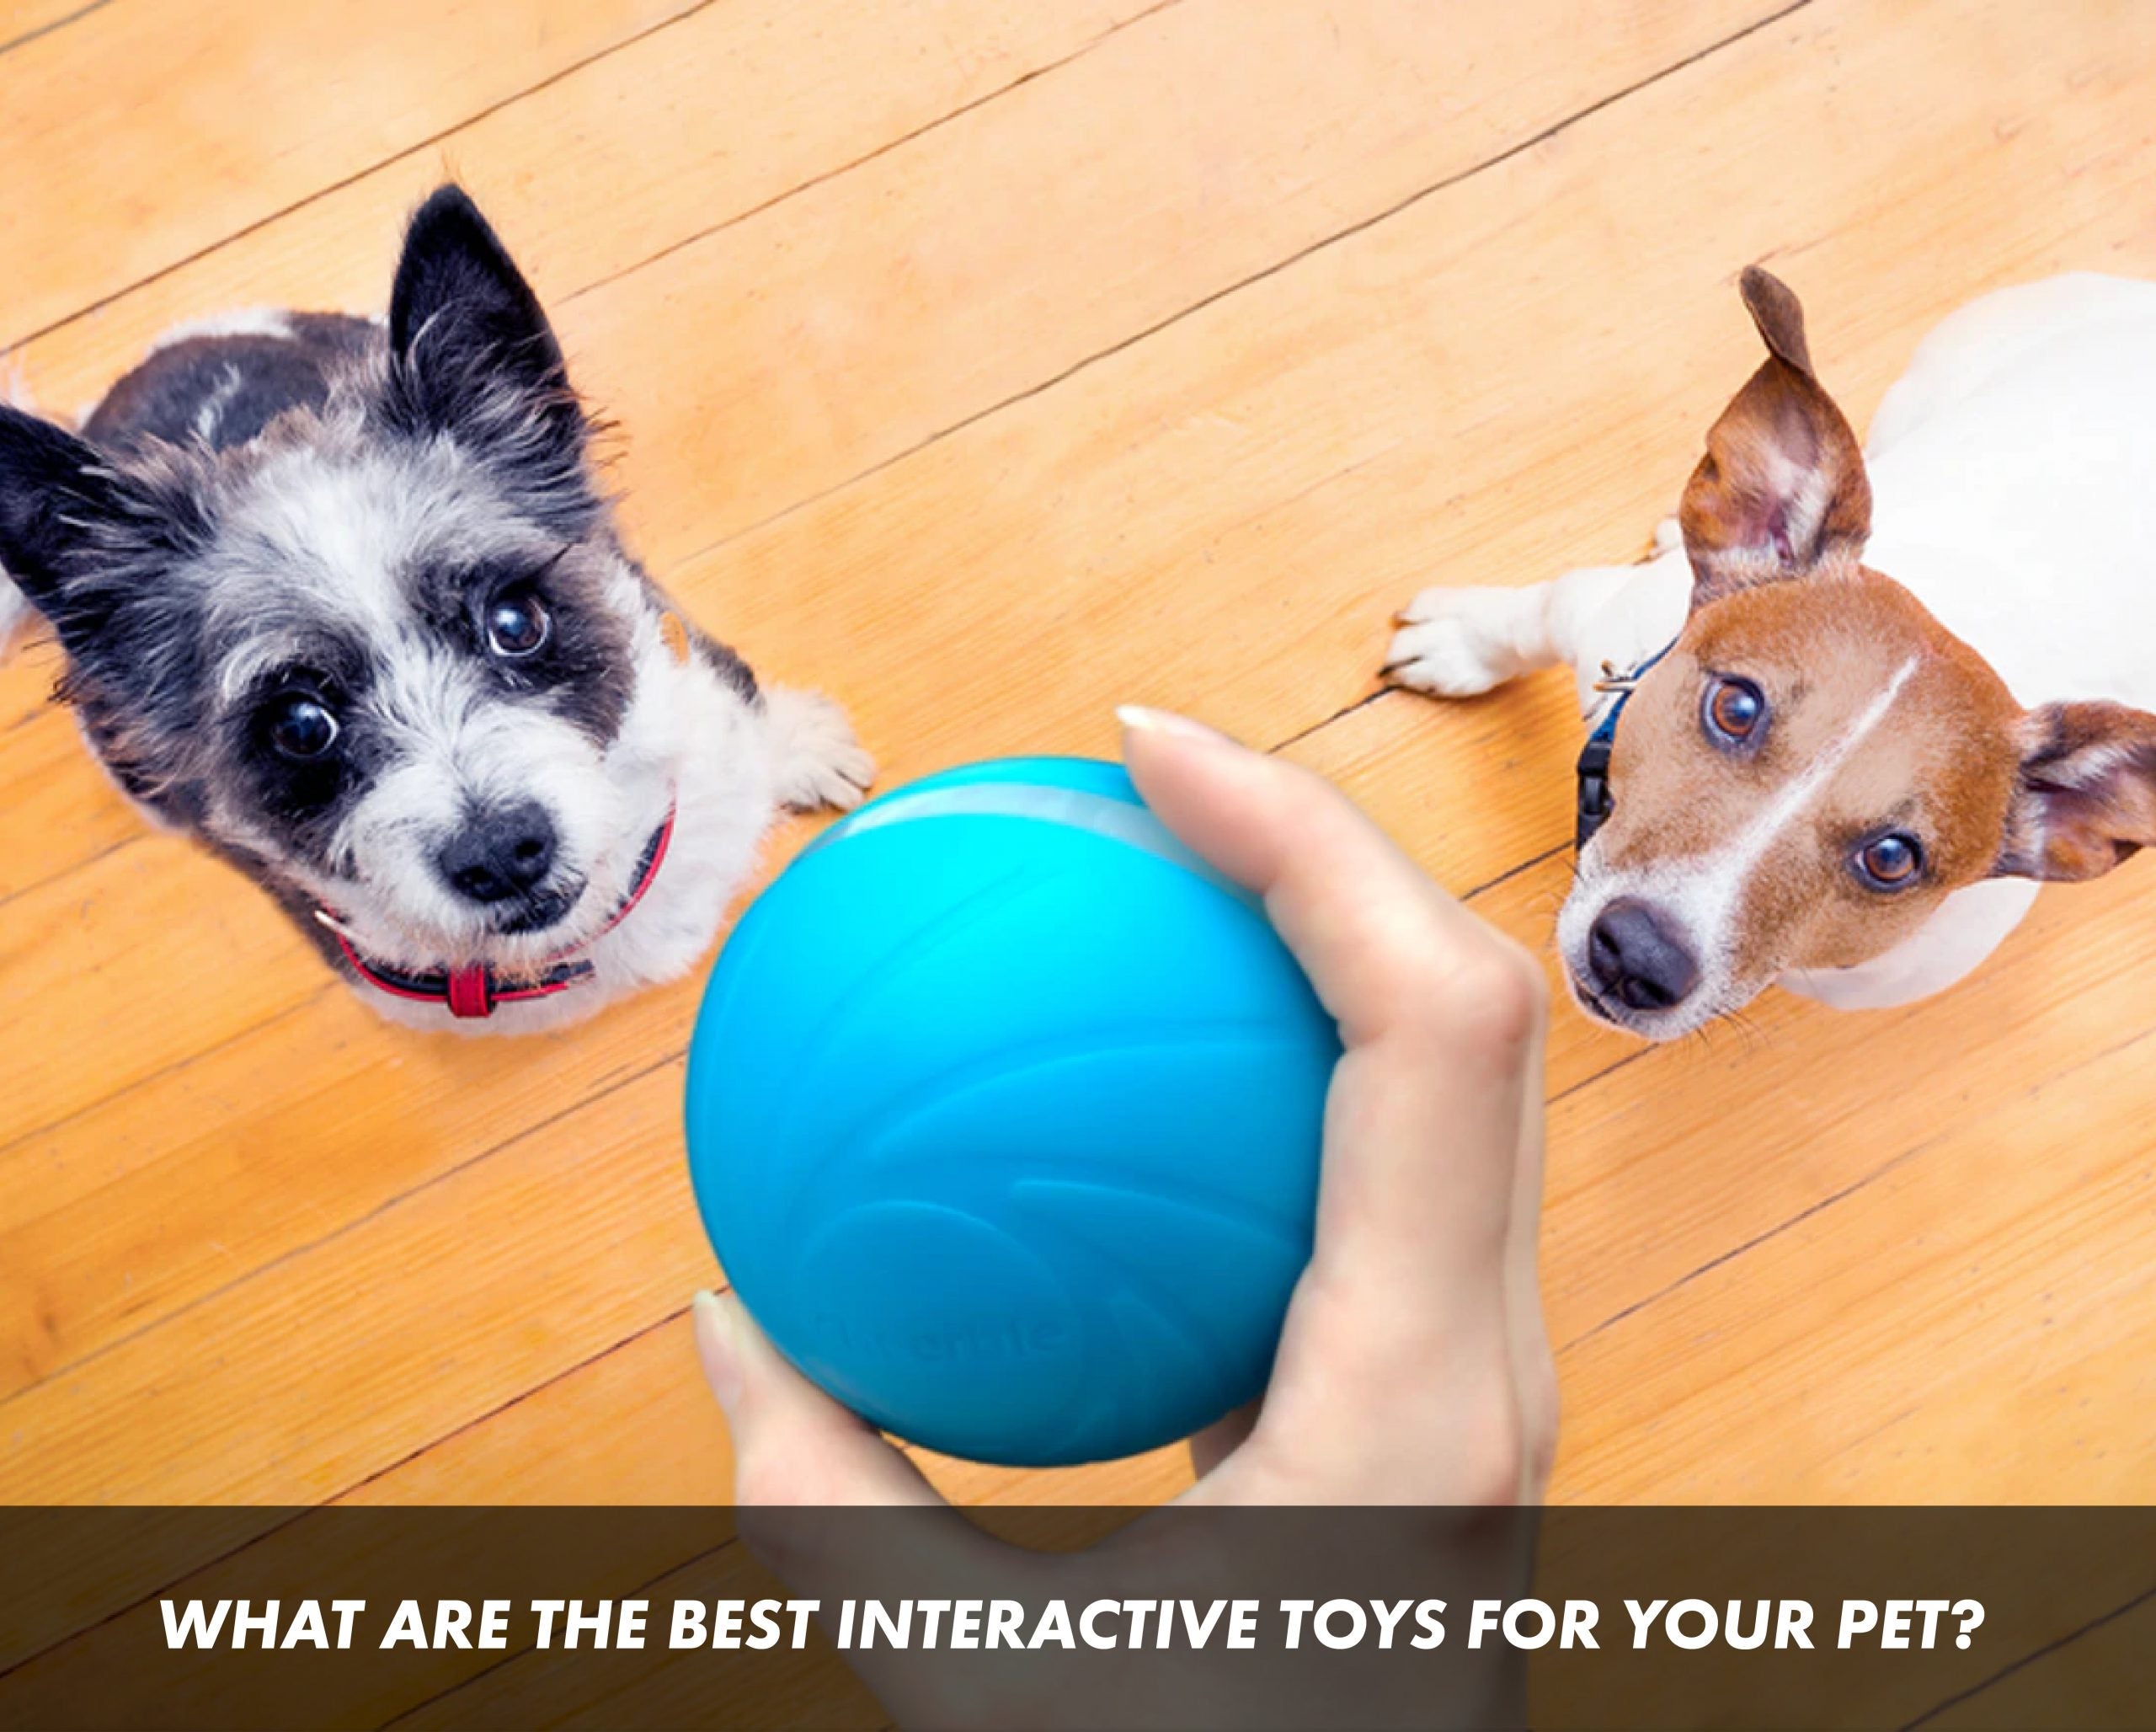 What are the Best Interactive Toys for your Pet?